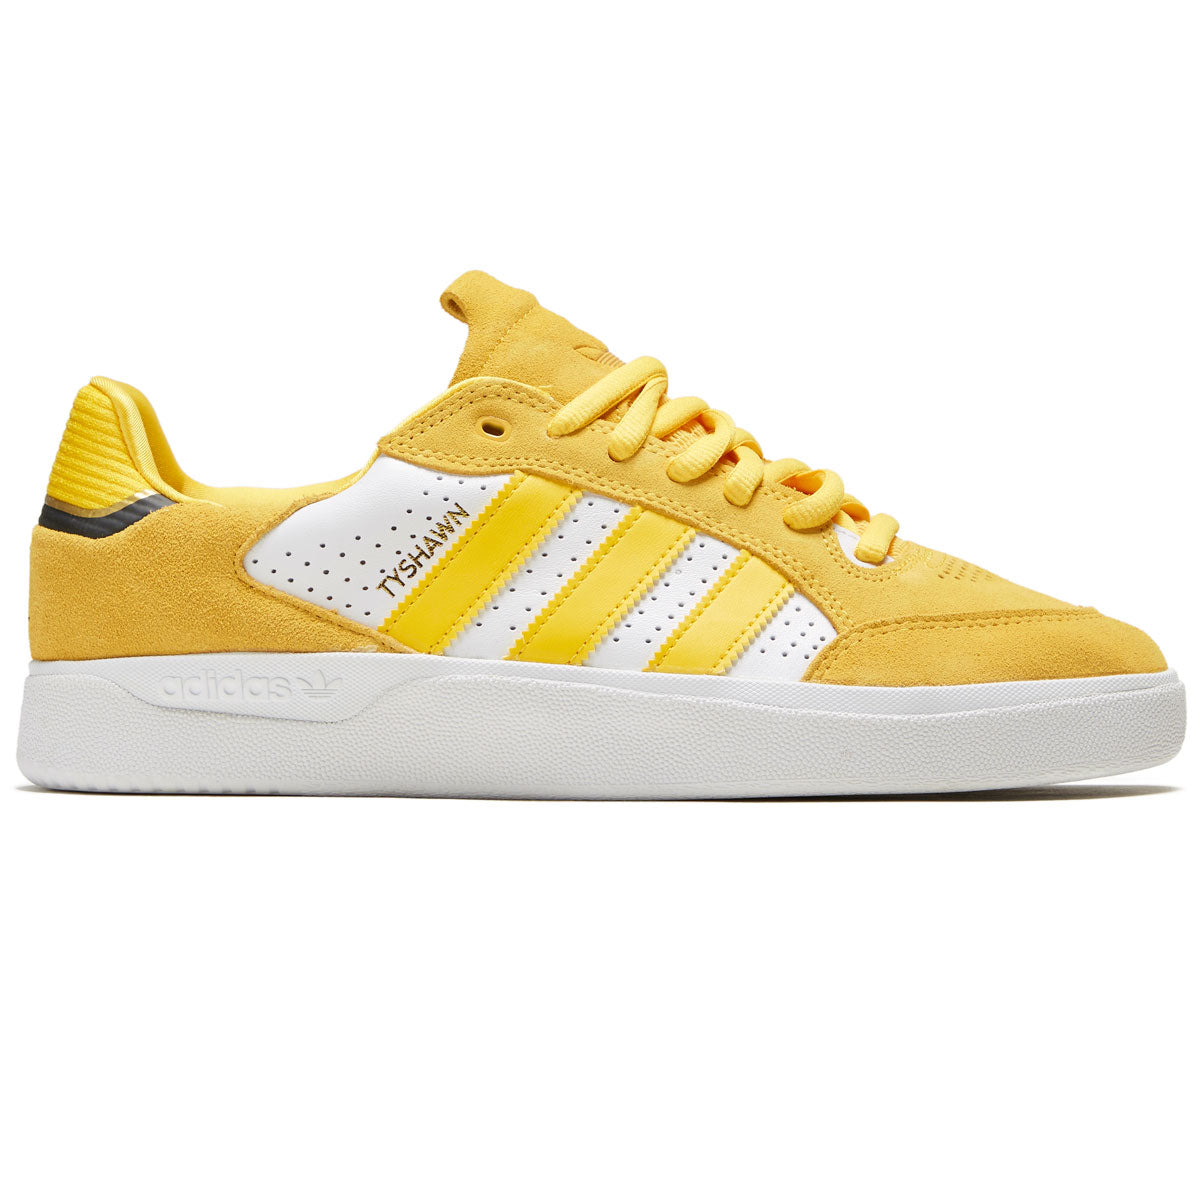 Adidas Tyshawn Low Shoes - Bold Gold/White/Core Black – CCS